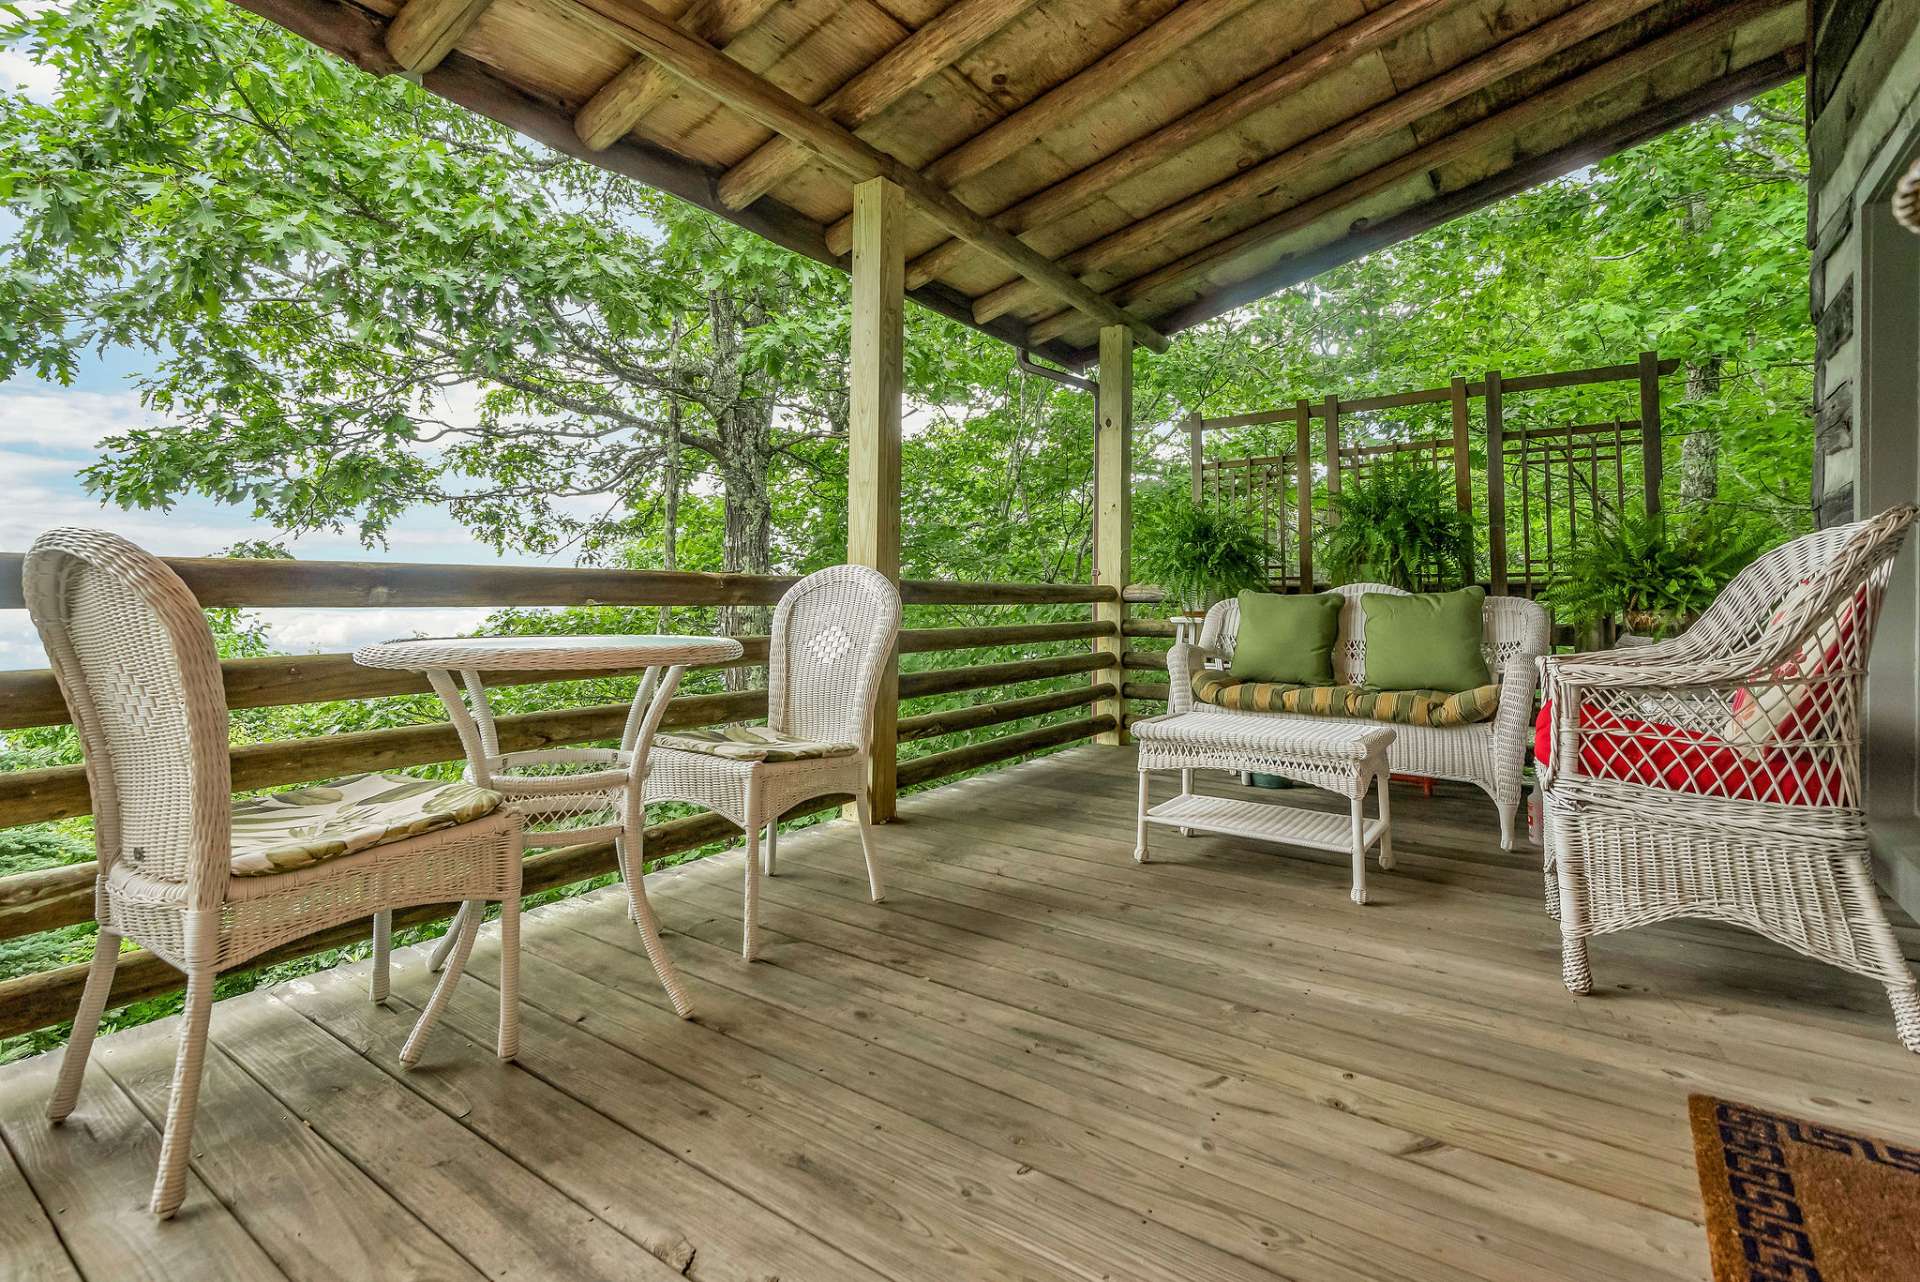 Plenty of outdoor space to sit and relax while watching nature unfold and share your amazing view from the deck.